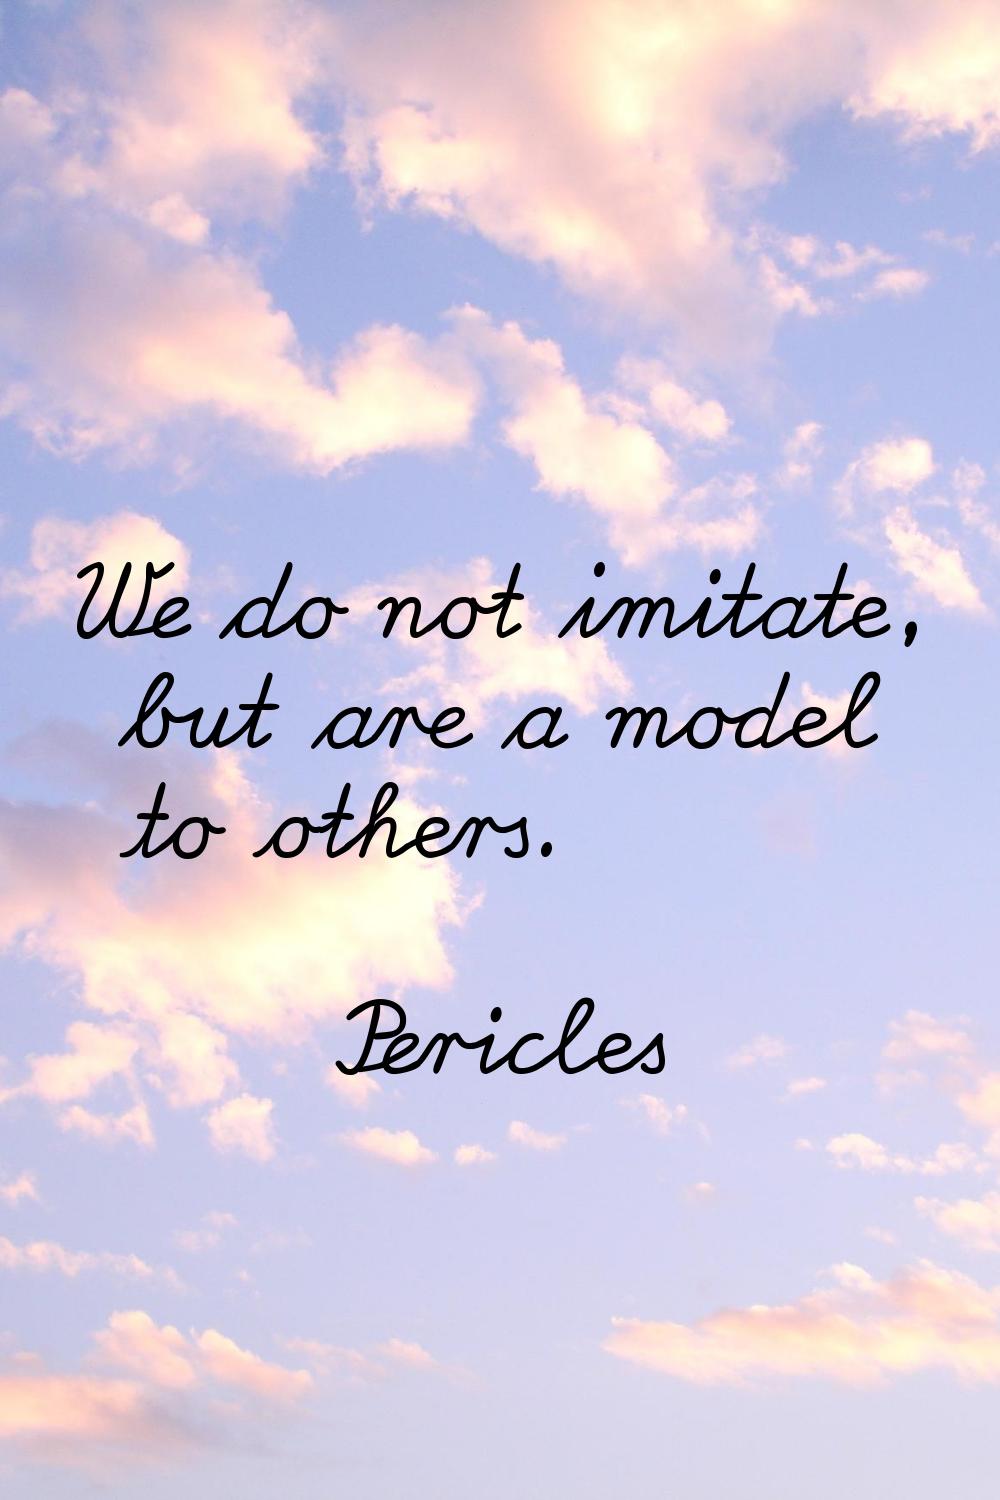 We do not imitate, but are a model to others.